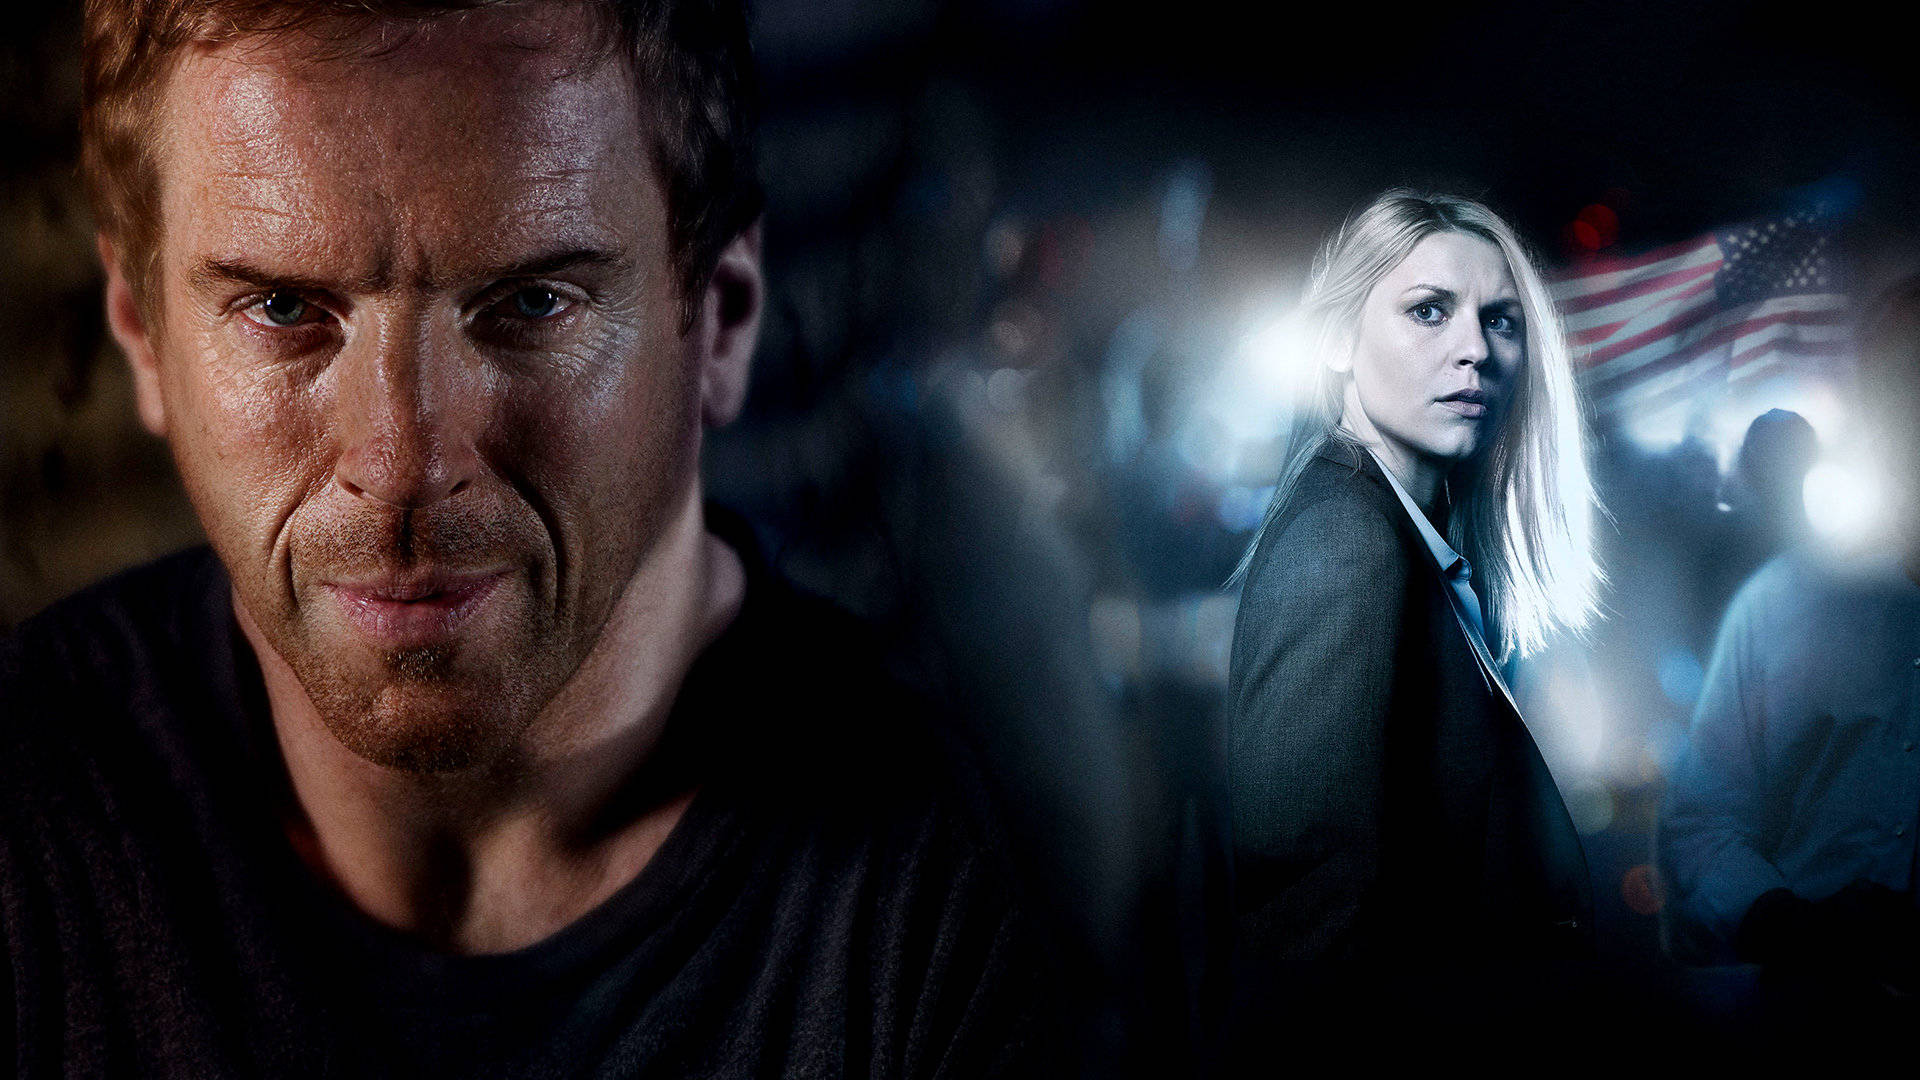 Intense Moments between Homeland Characters Nicholas and Carrie Wallpaper